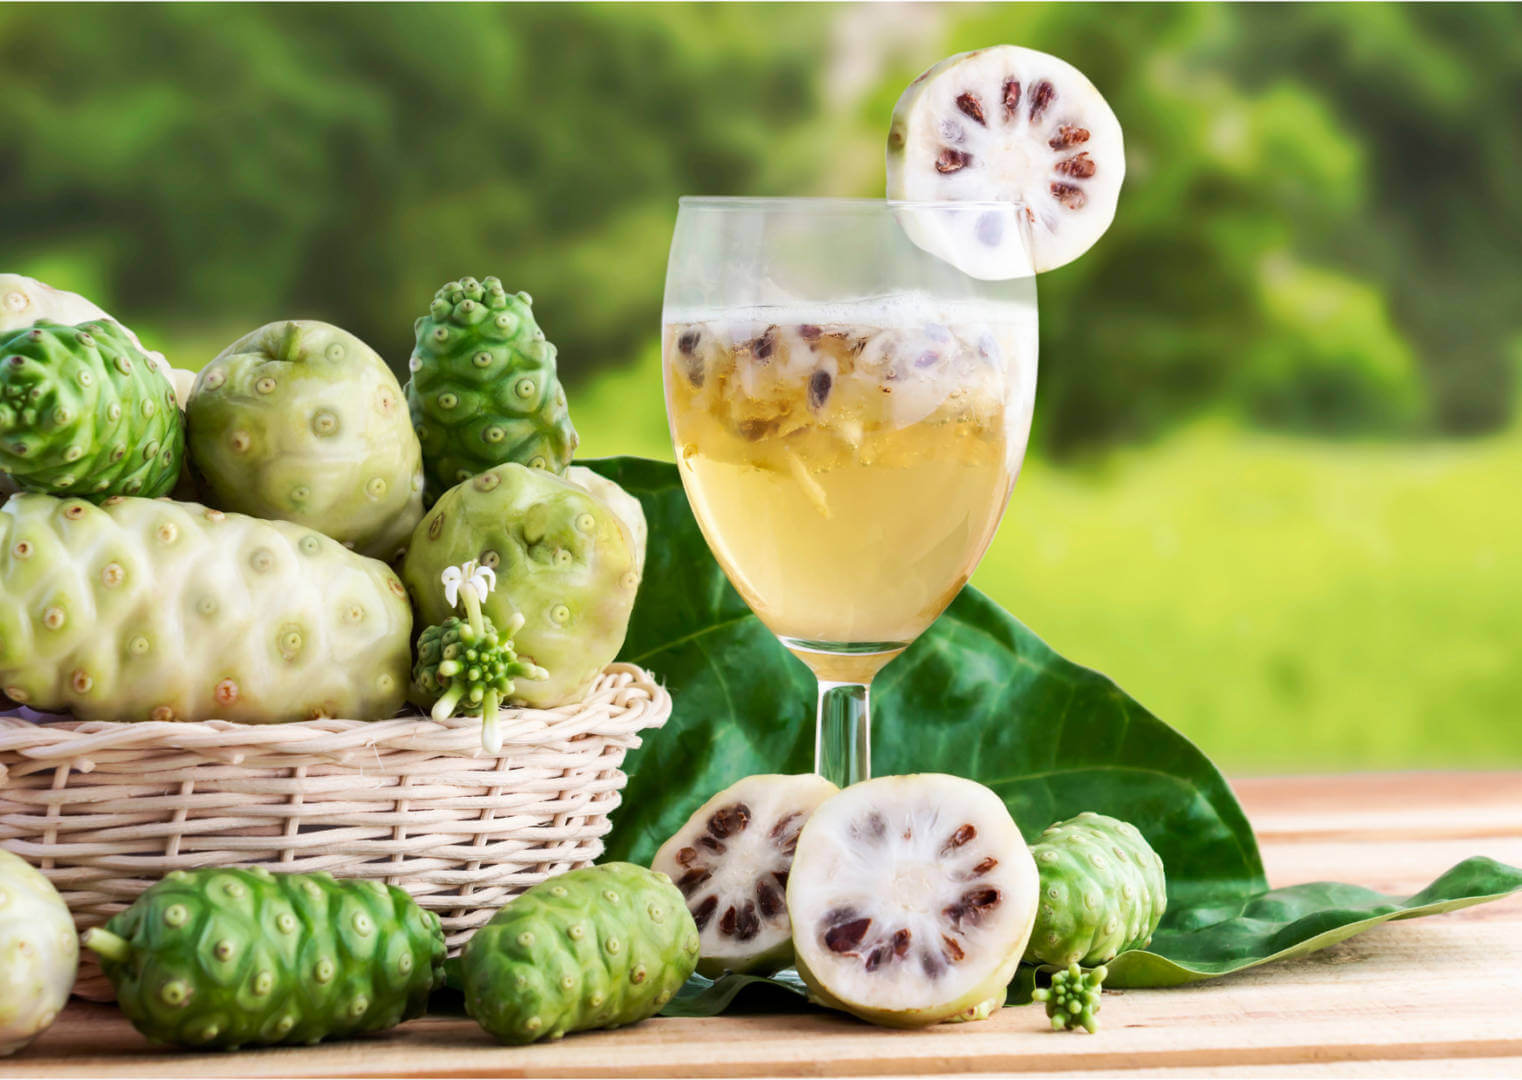 BENEFITS OF NONI LEAVES